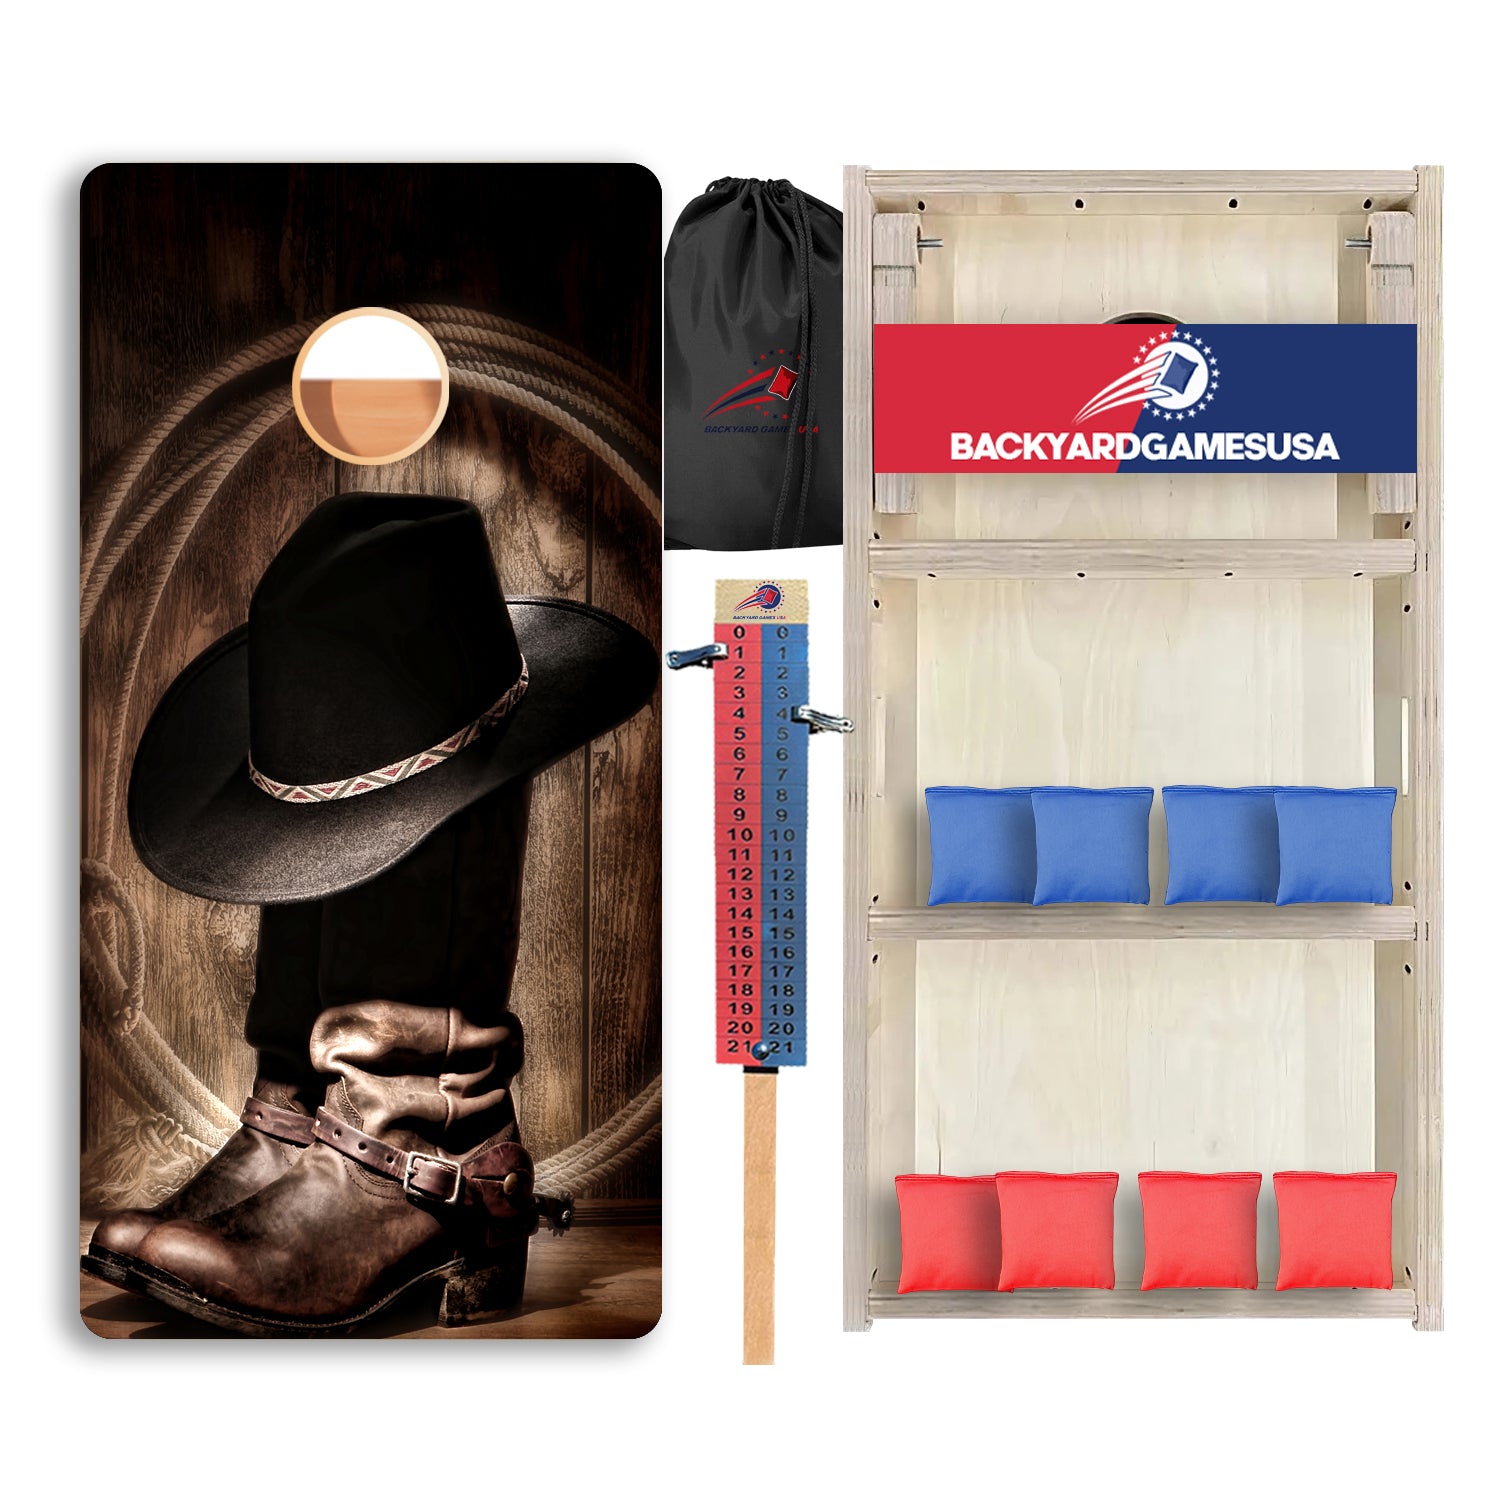 Cowboy Boots and Hat Professional Cornhole Boards